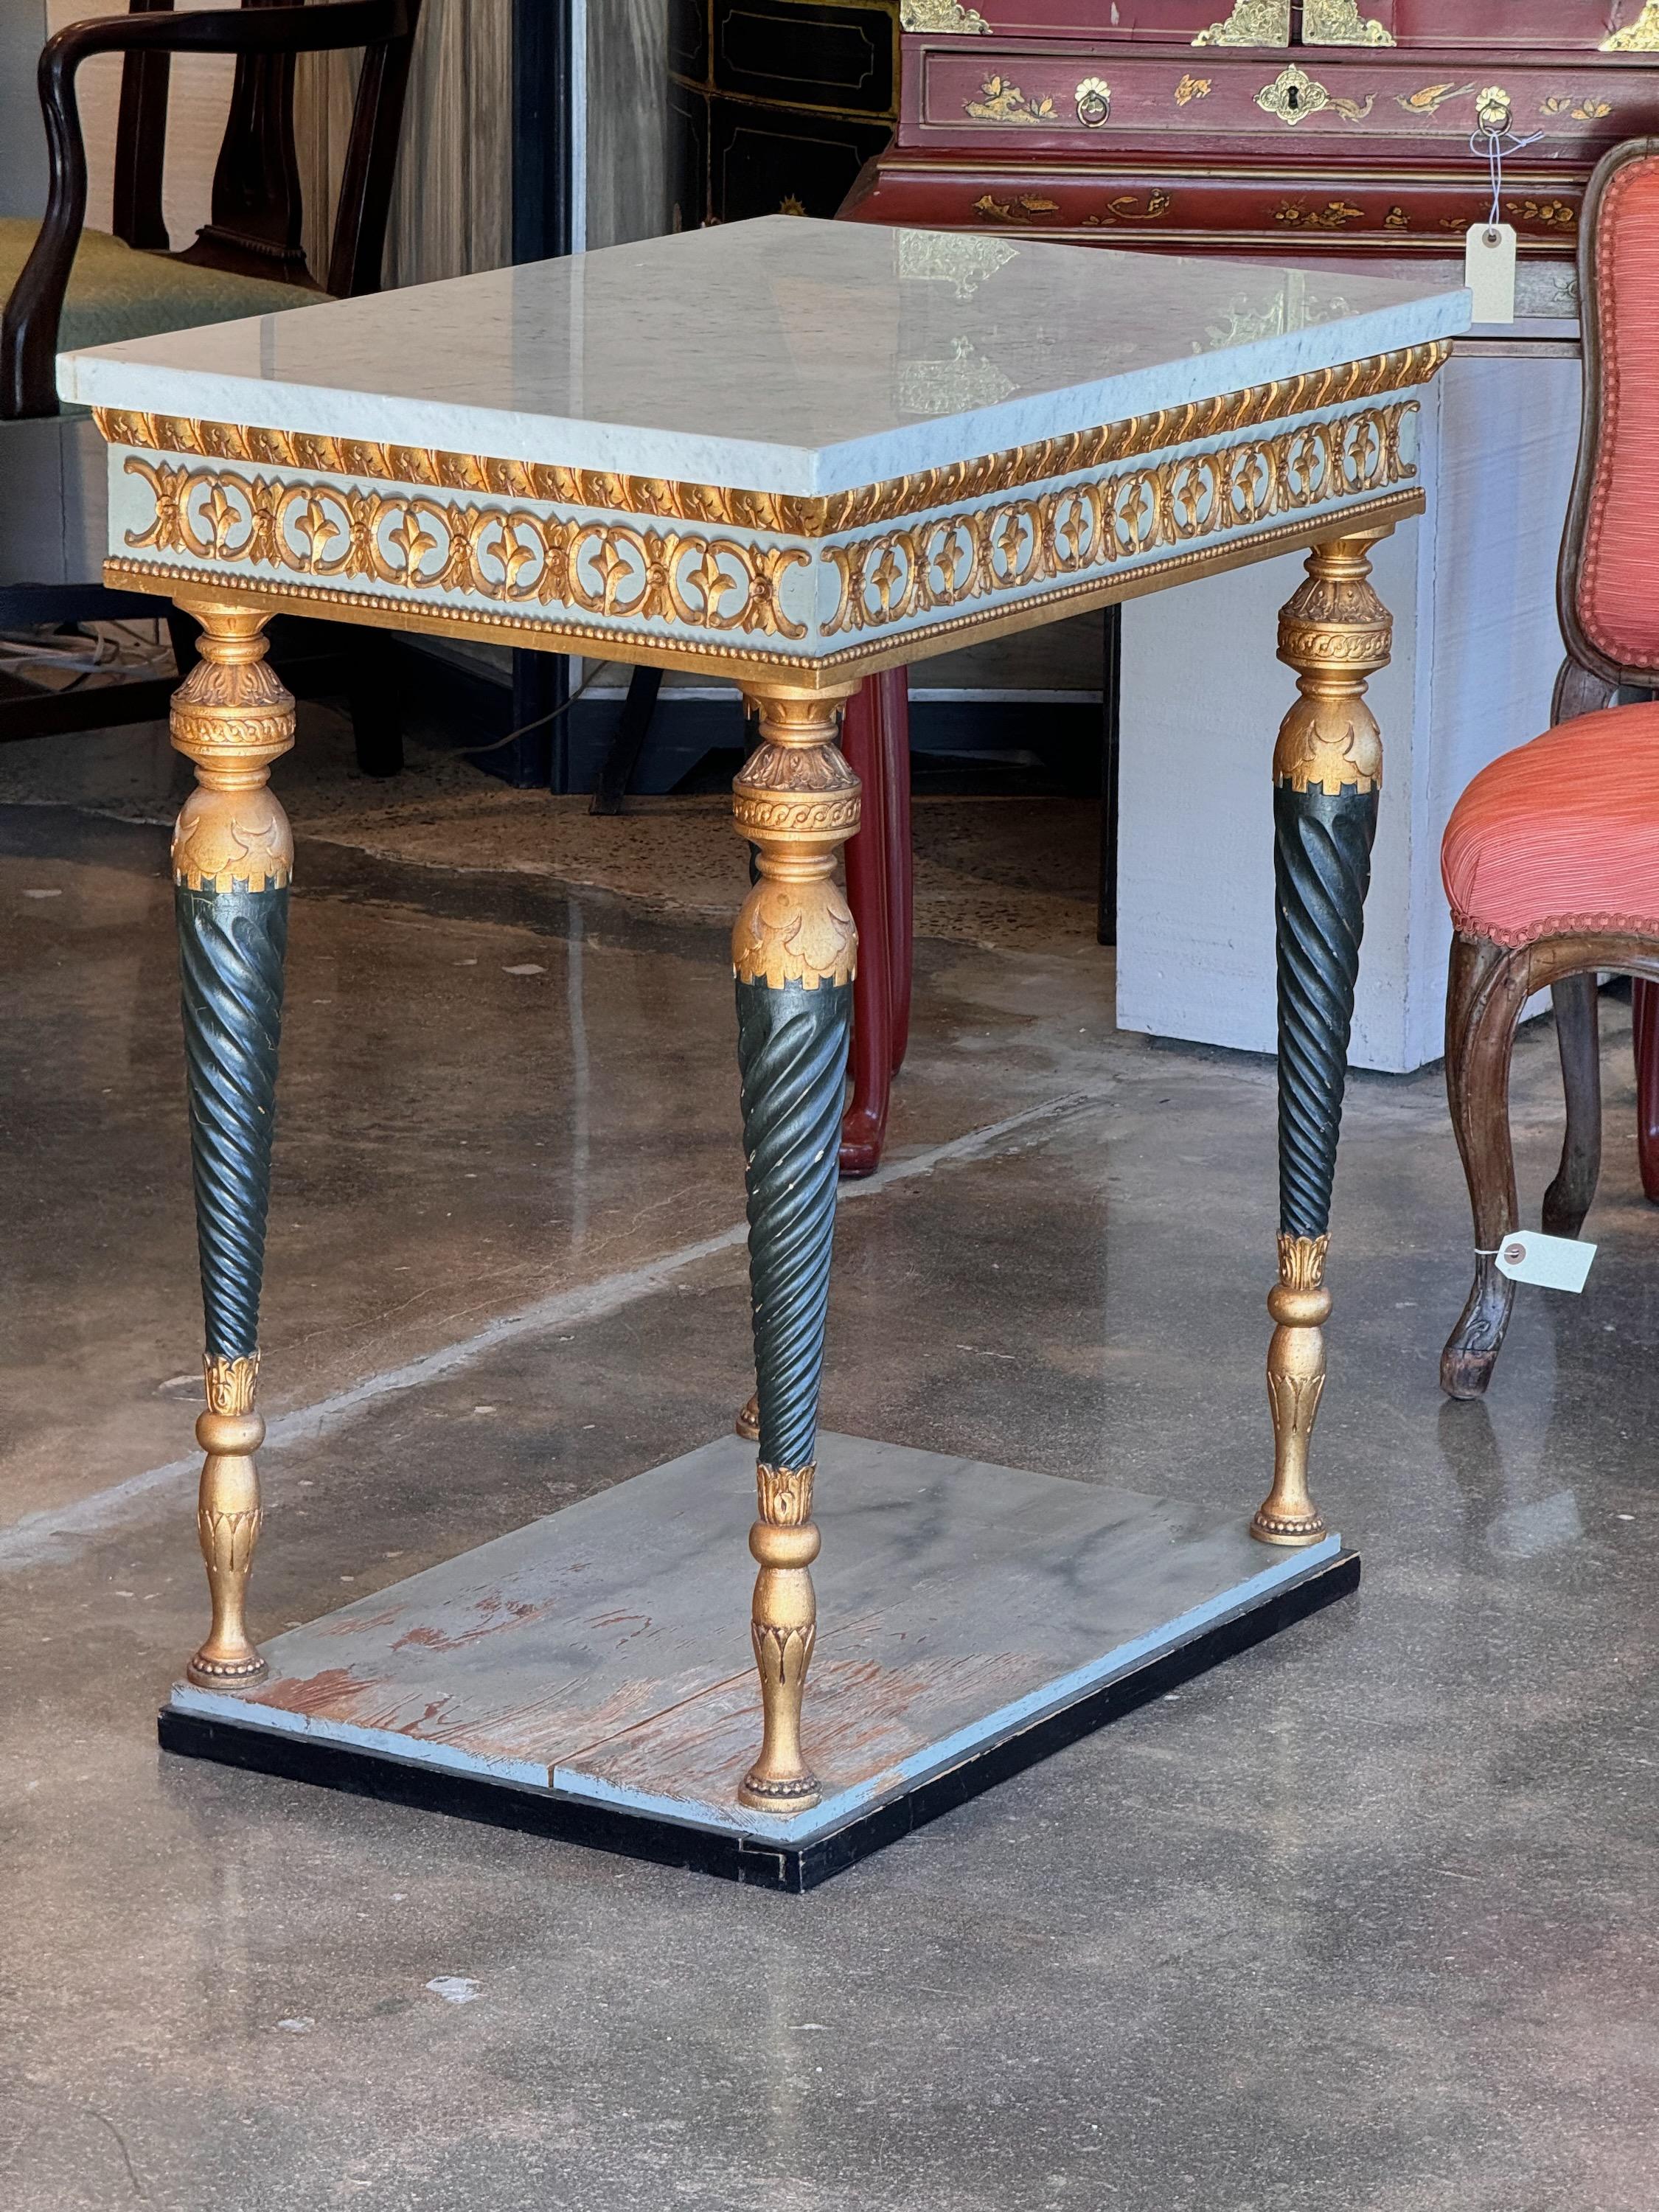 Everyone loves Swedish. And this is a beautiful console table